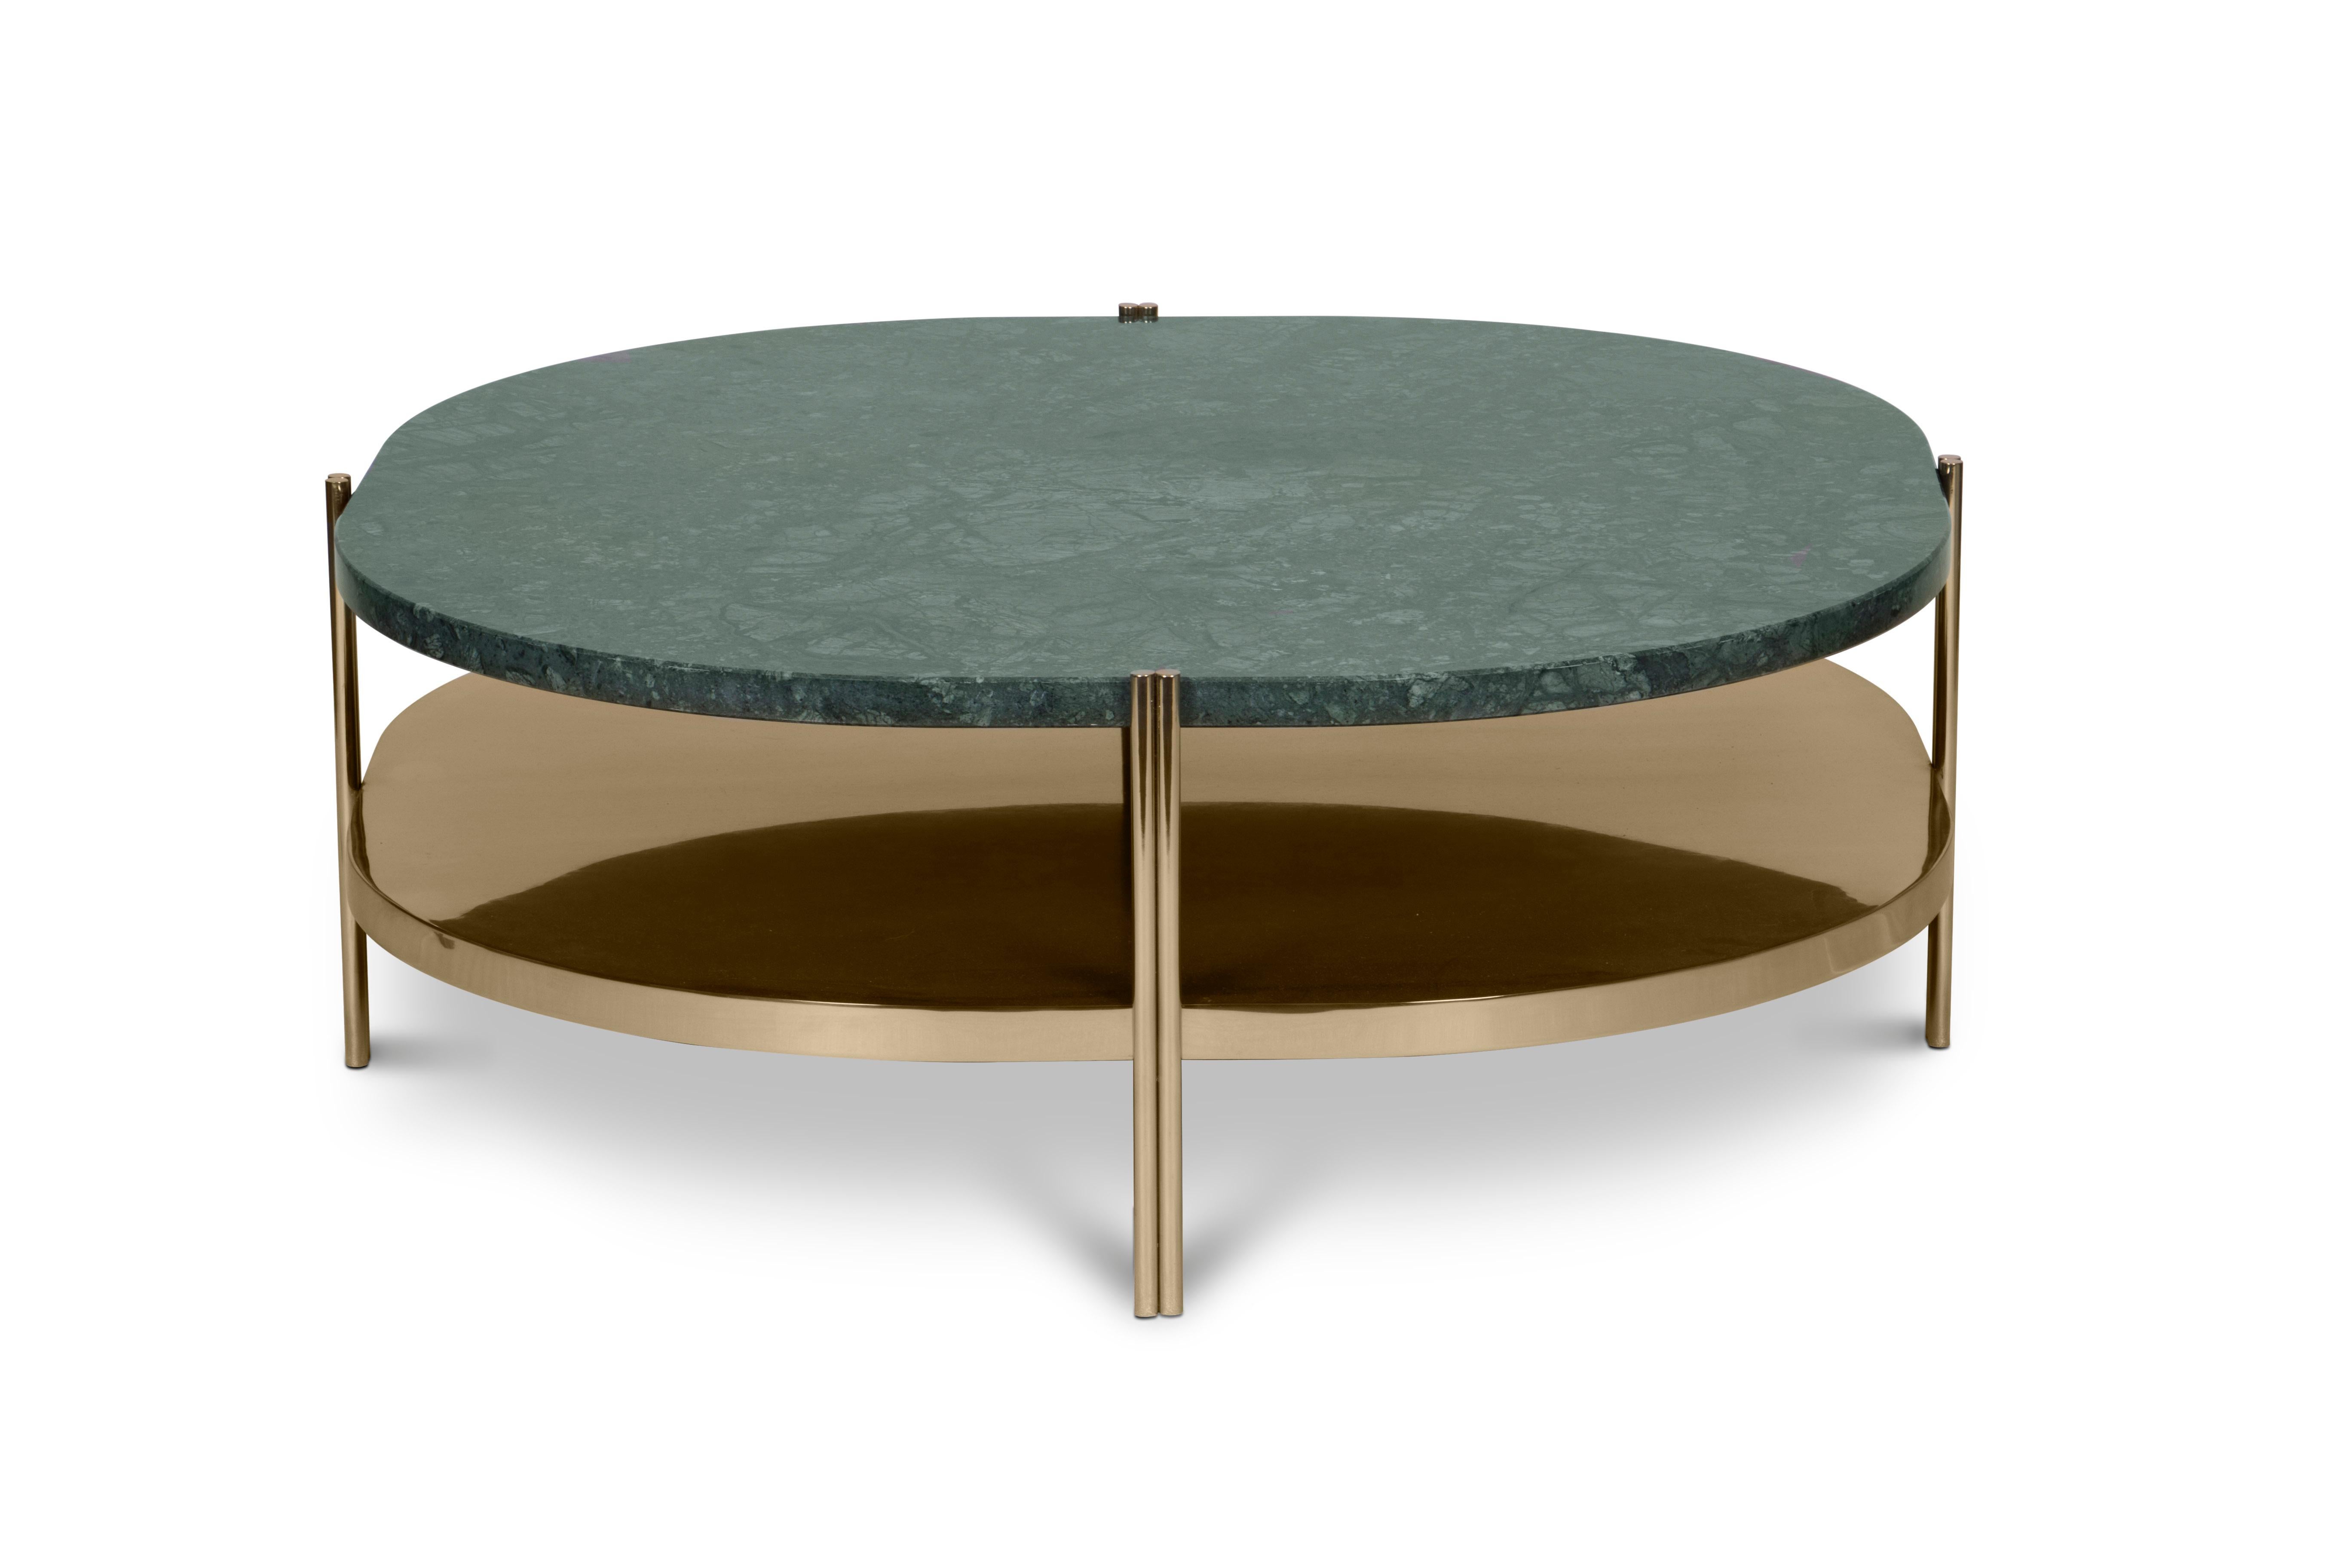 Craig Ellwood was an influential Los Angeles-based modernist architect who fashioned a persona and career through equal parts of a talent for good design, self-promotion and ambition. Our mid-century modern Craig Center Table carries an